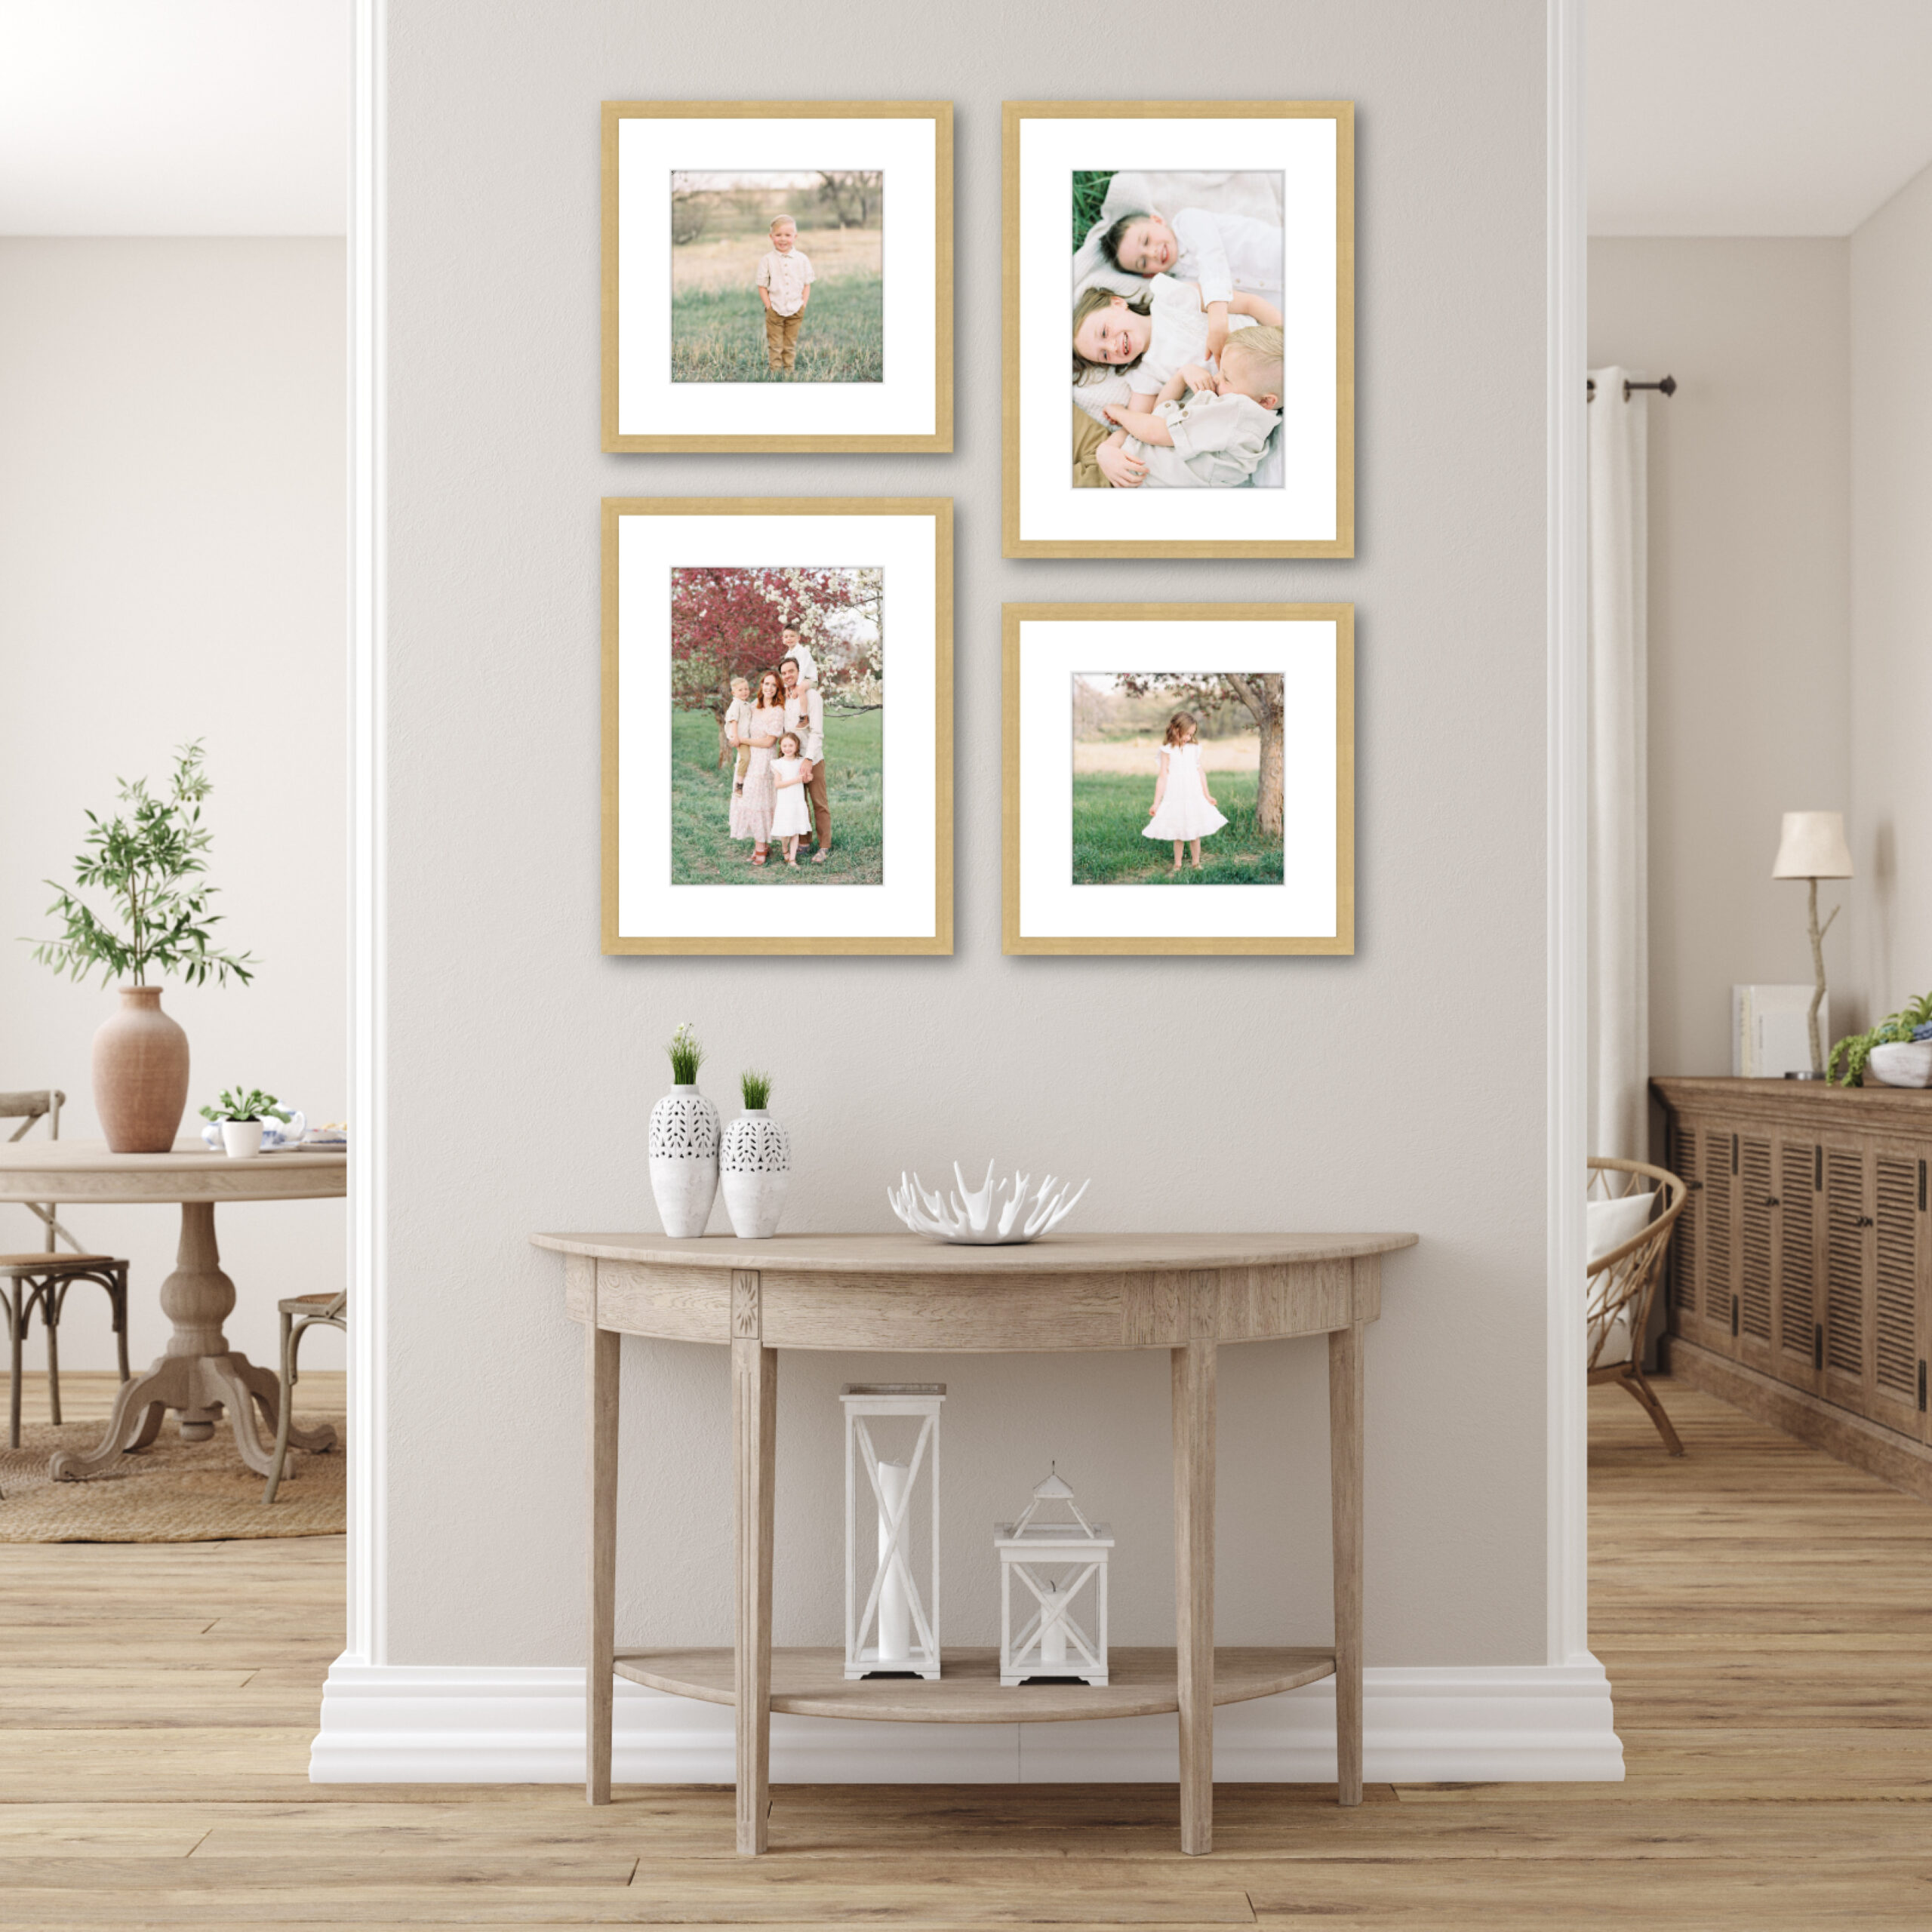 family photos in a gallery wall above entry table